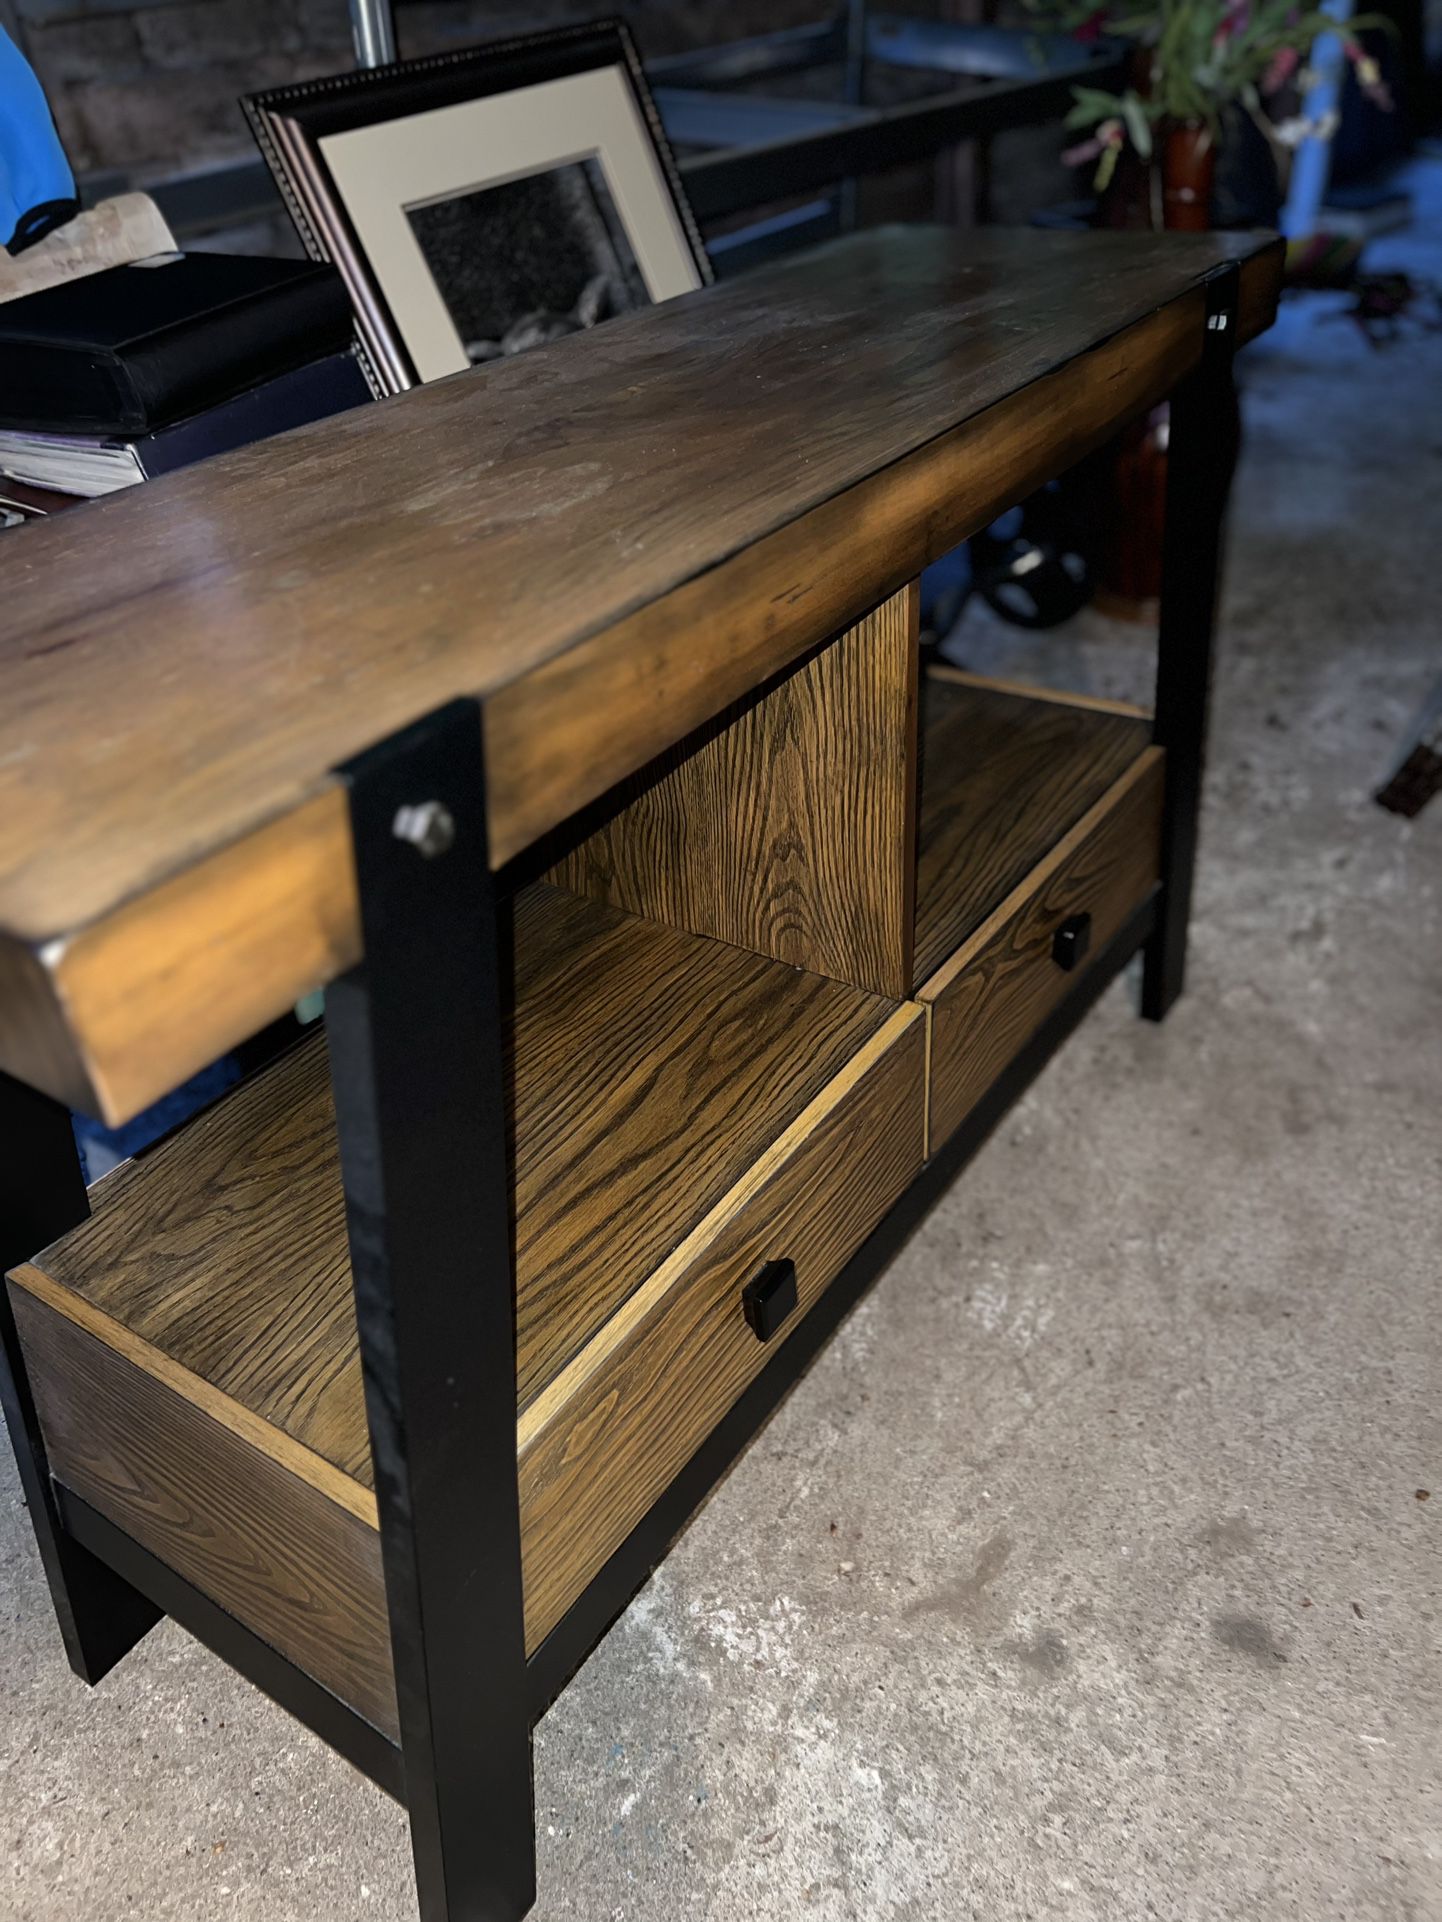 TV Stand - Mint Condition